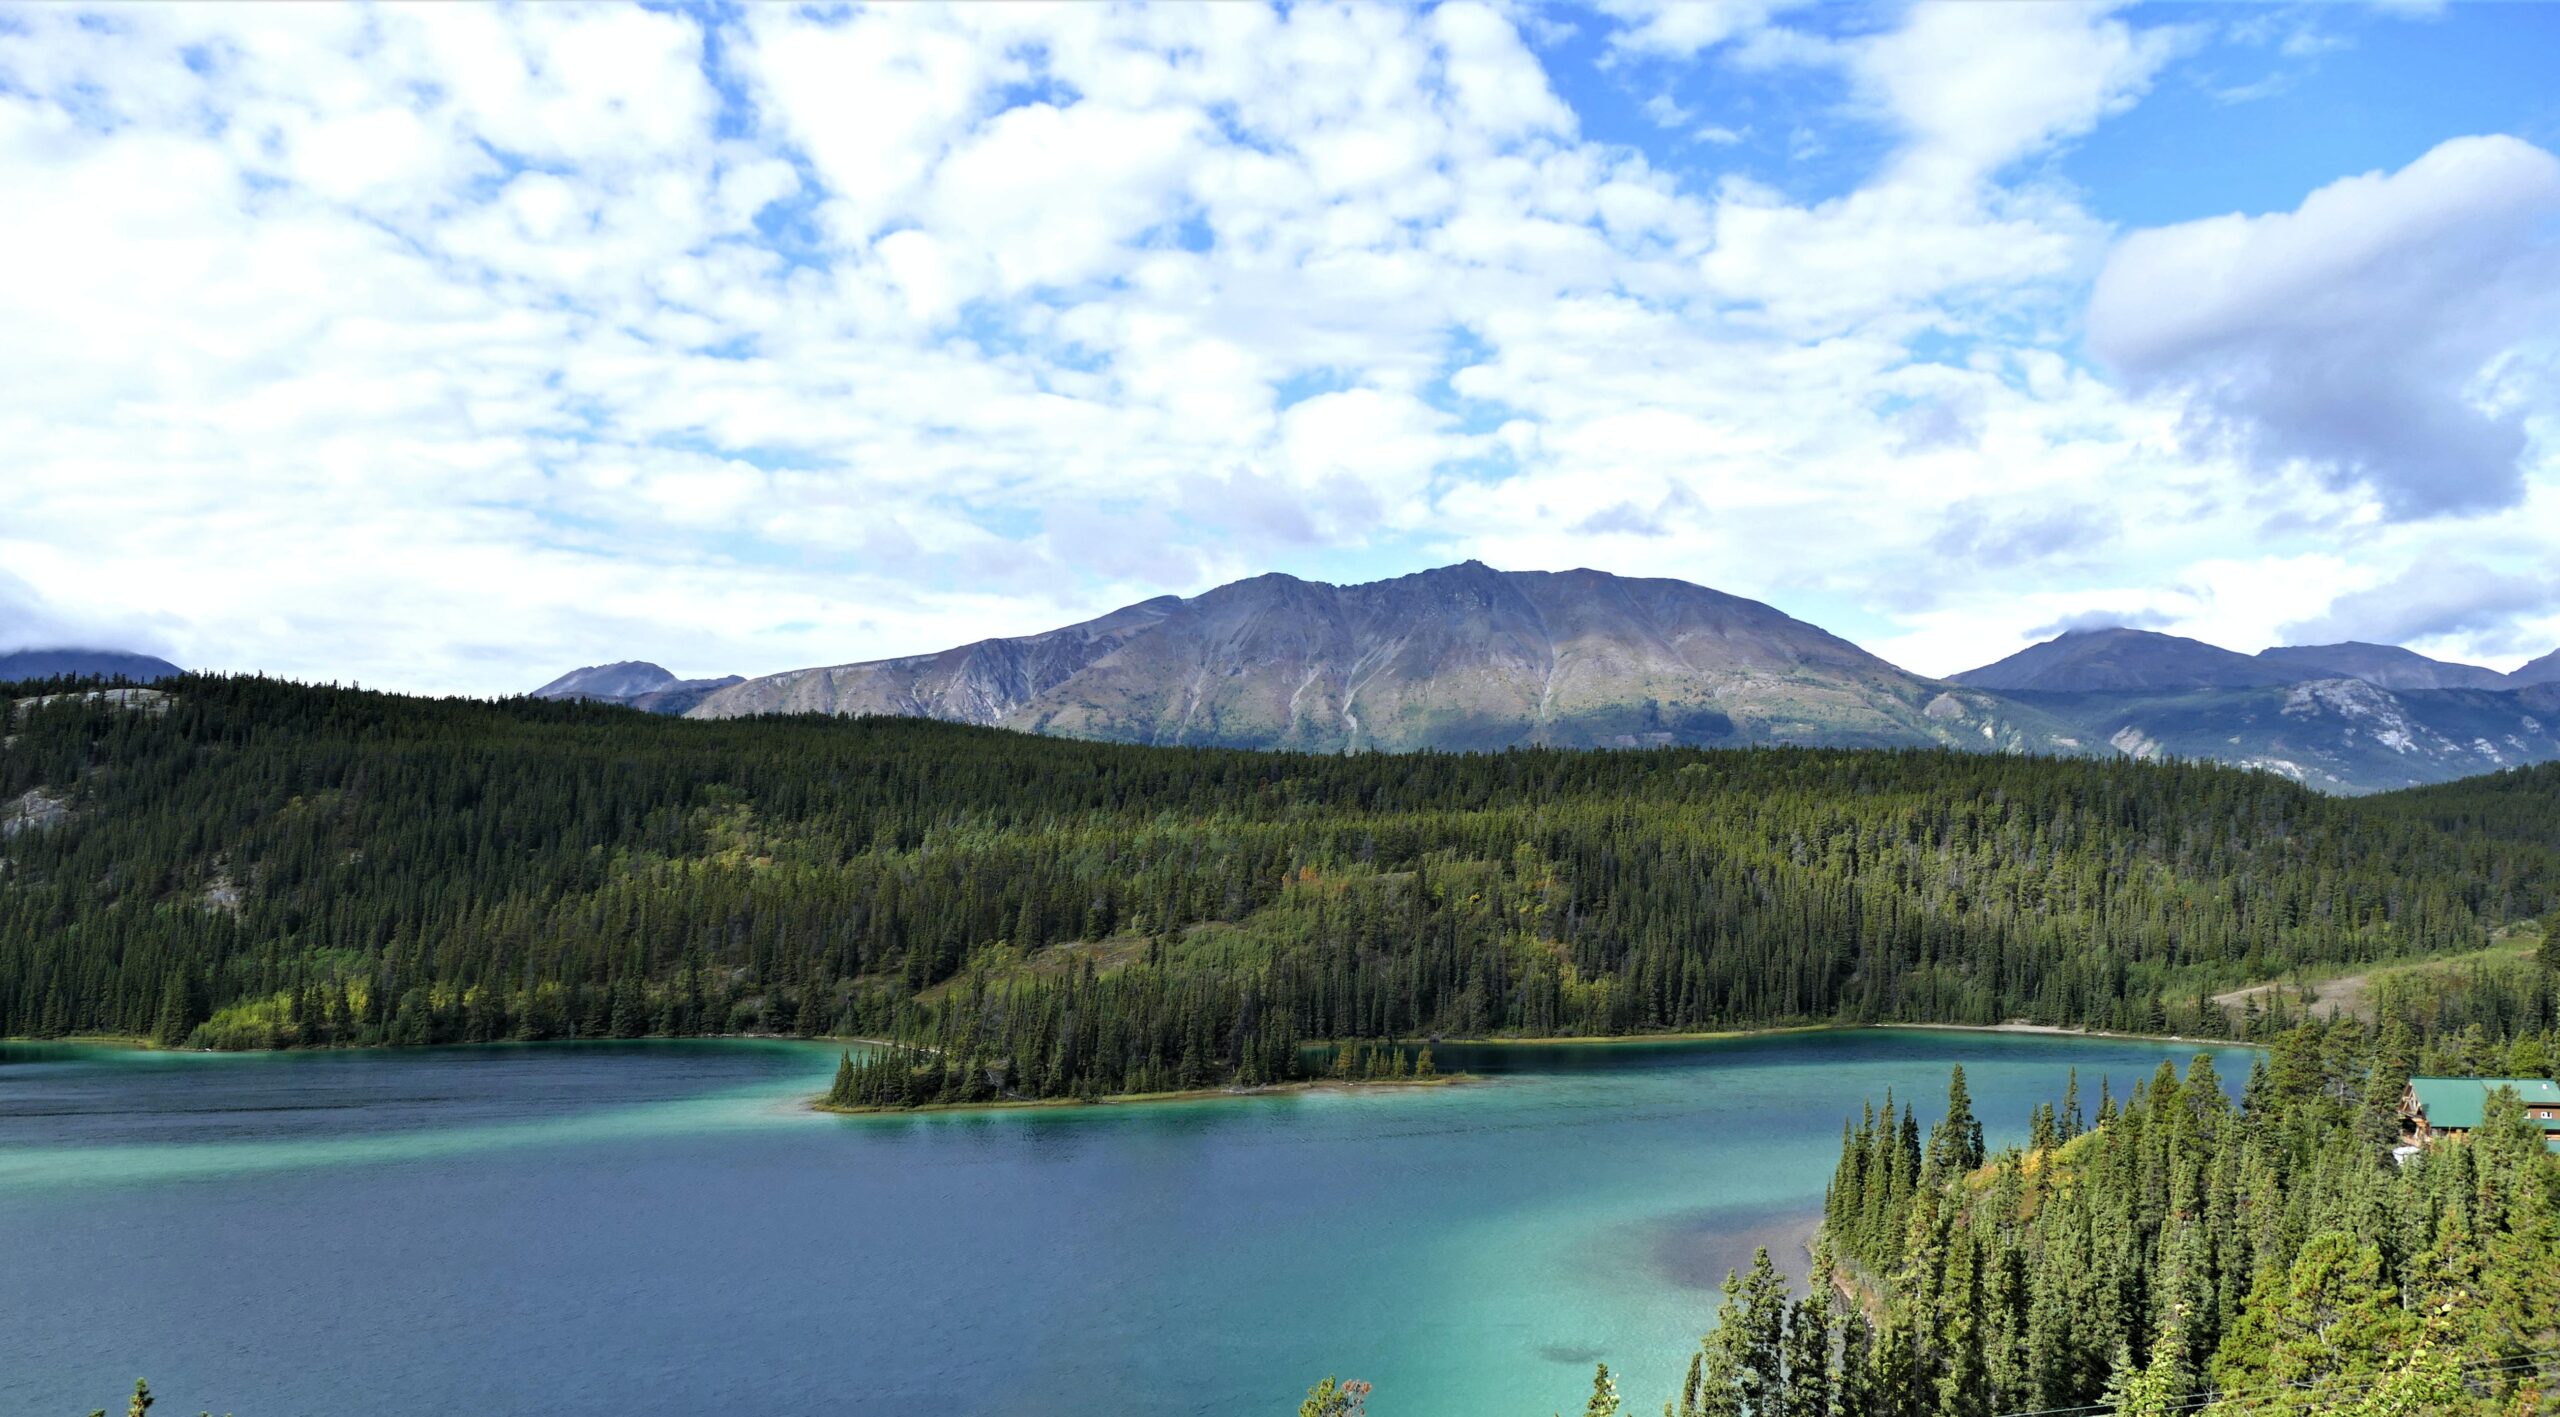 Emerald Lake, surrounded by forests with mountains in the background.